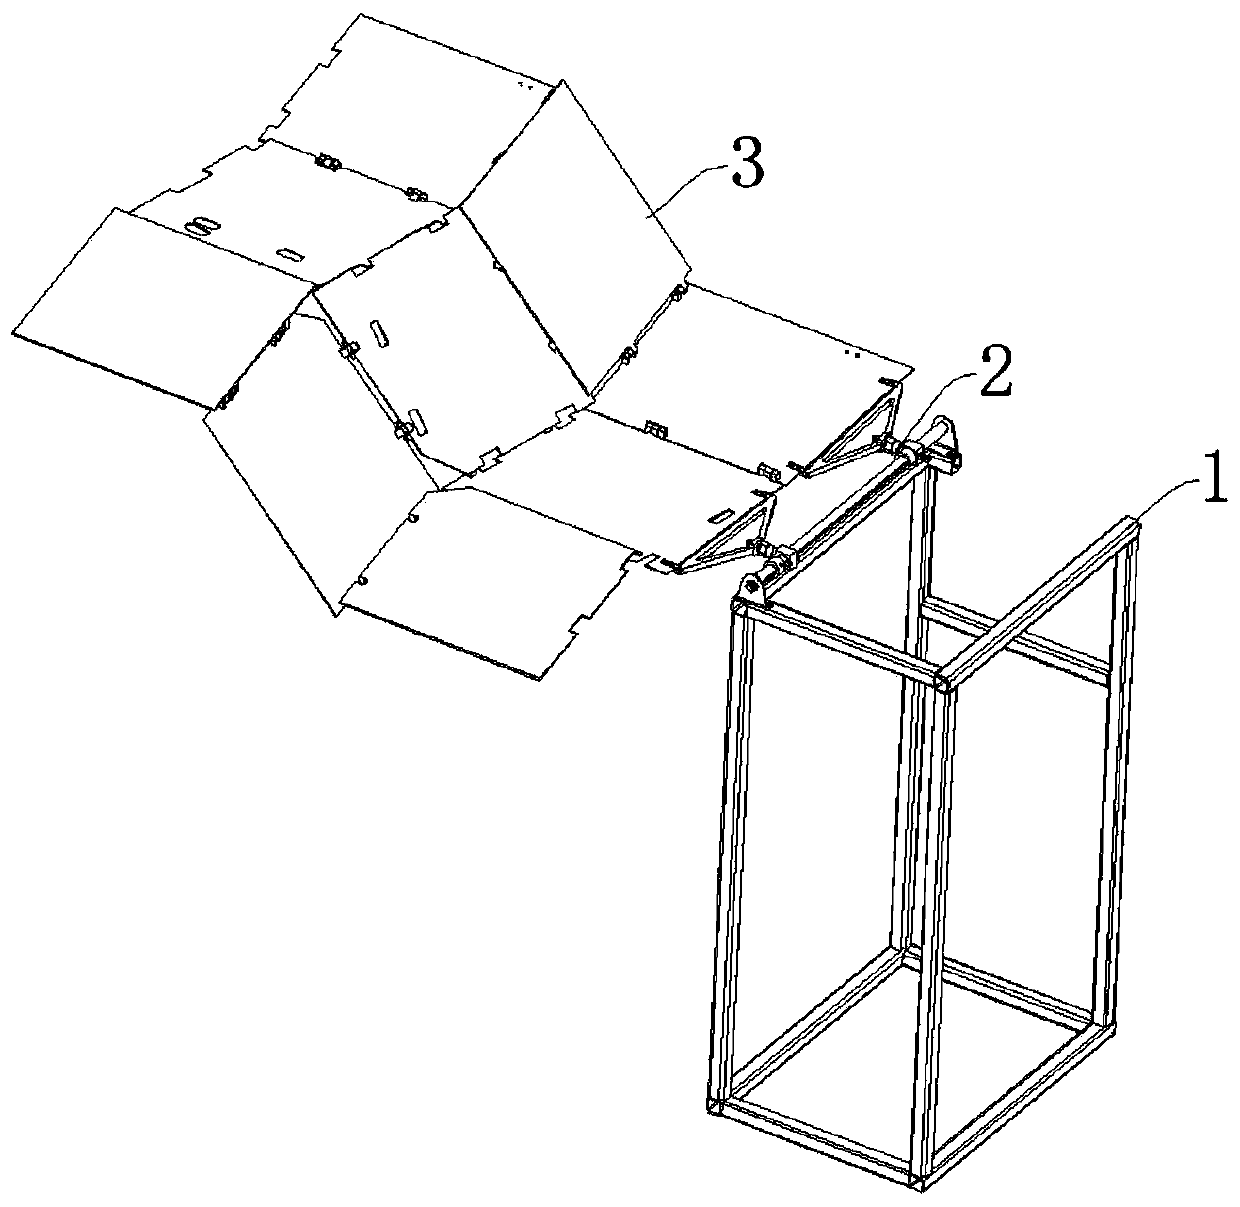 Camouflage net erection and retraction device